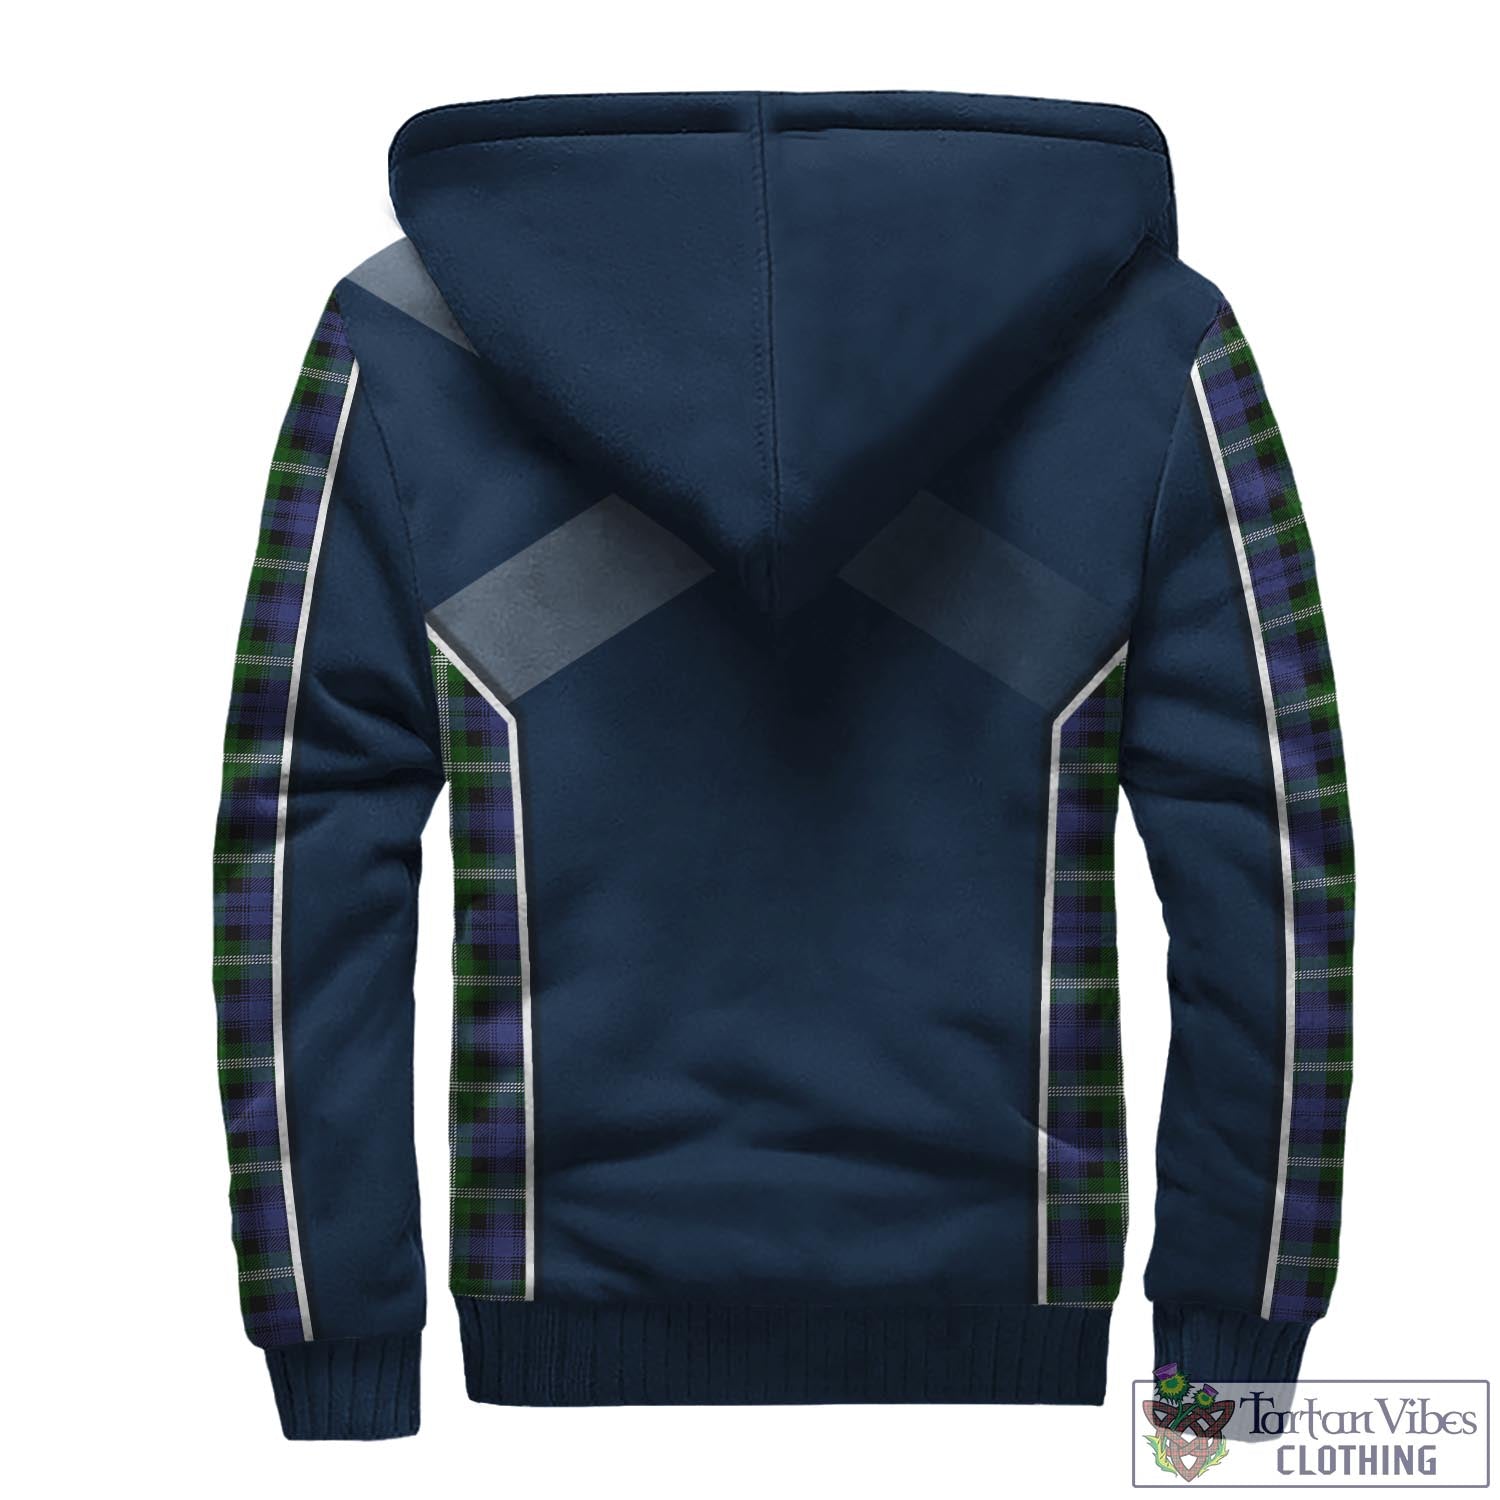 Tartan Vibes Clothing Baillie Modern Tartan Sherpa Hoodie with Family Crest and Scottish Thistle Vibes Sport Style